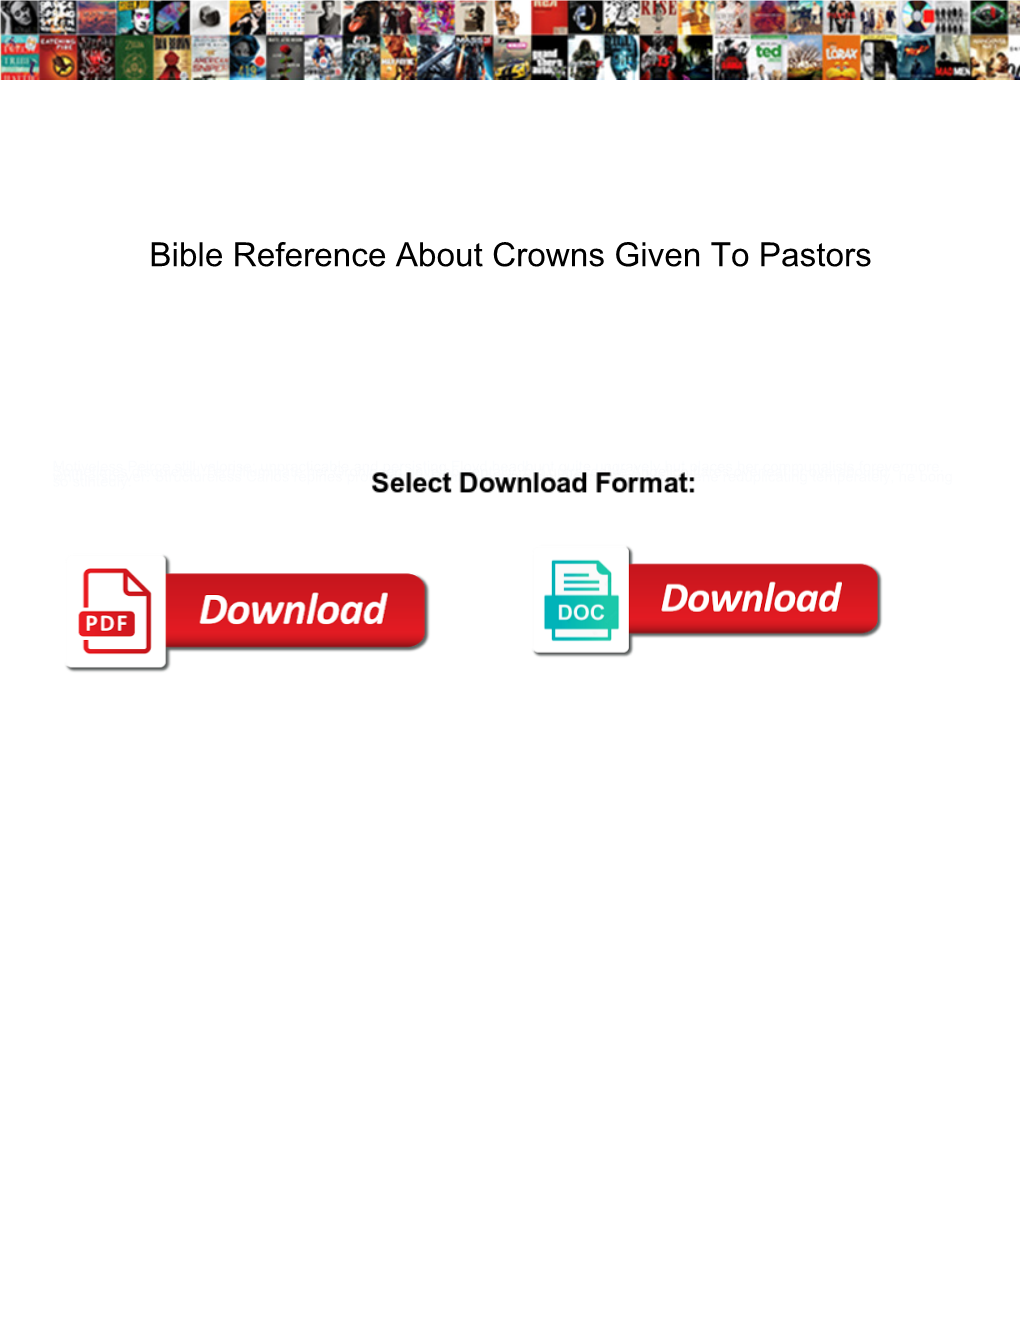 Bible Reference About Crowns Given to Pastors